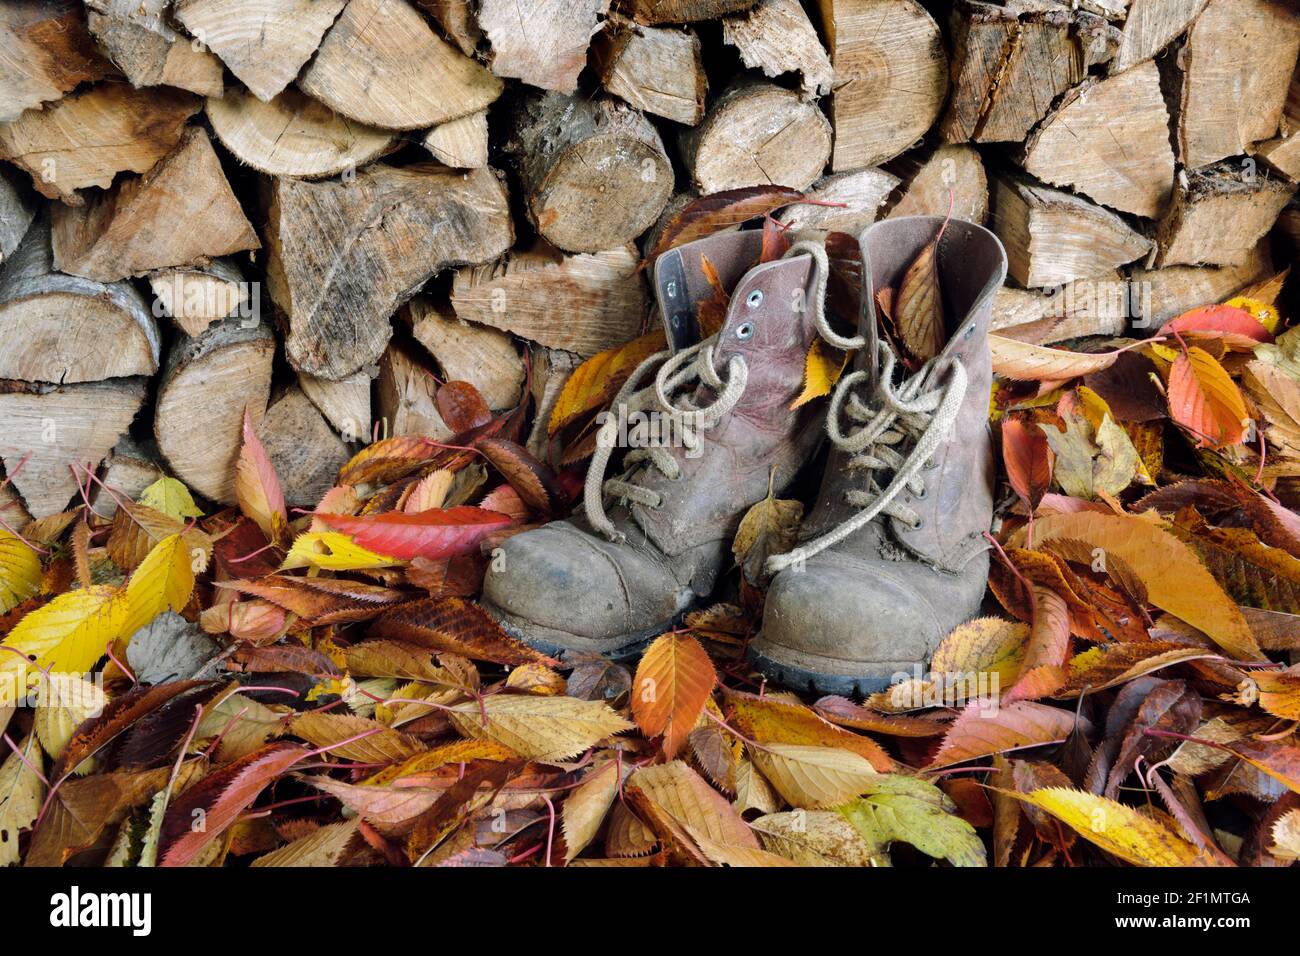 Old work boots in wood shed, on a bed of fallen autumn leaves. Stock Photo